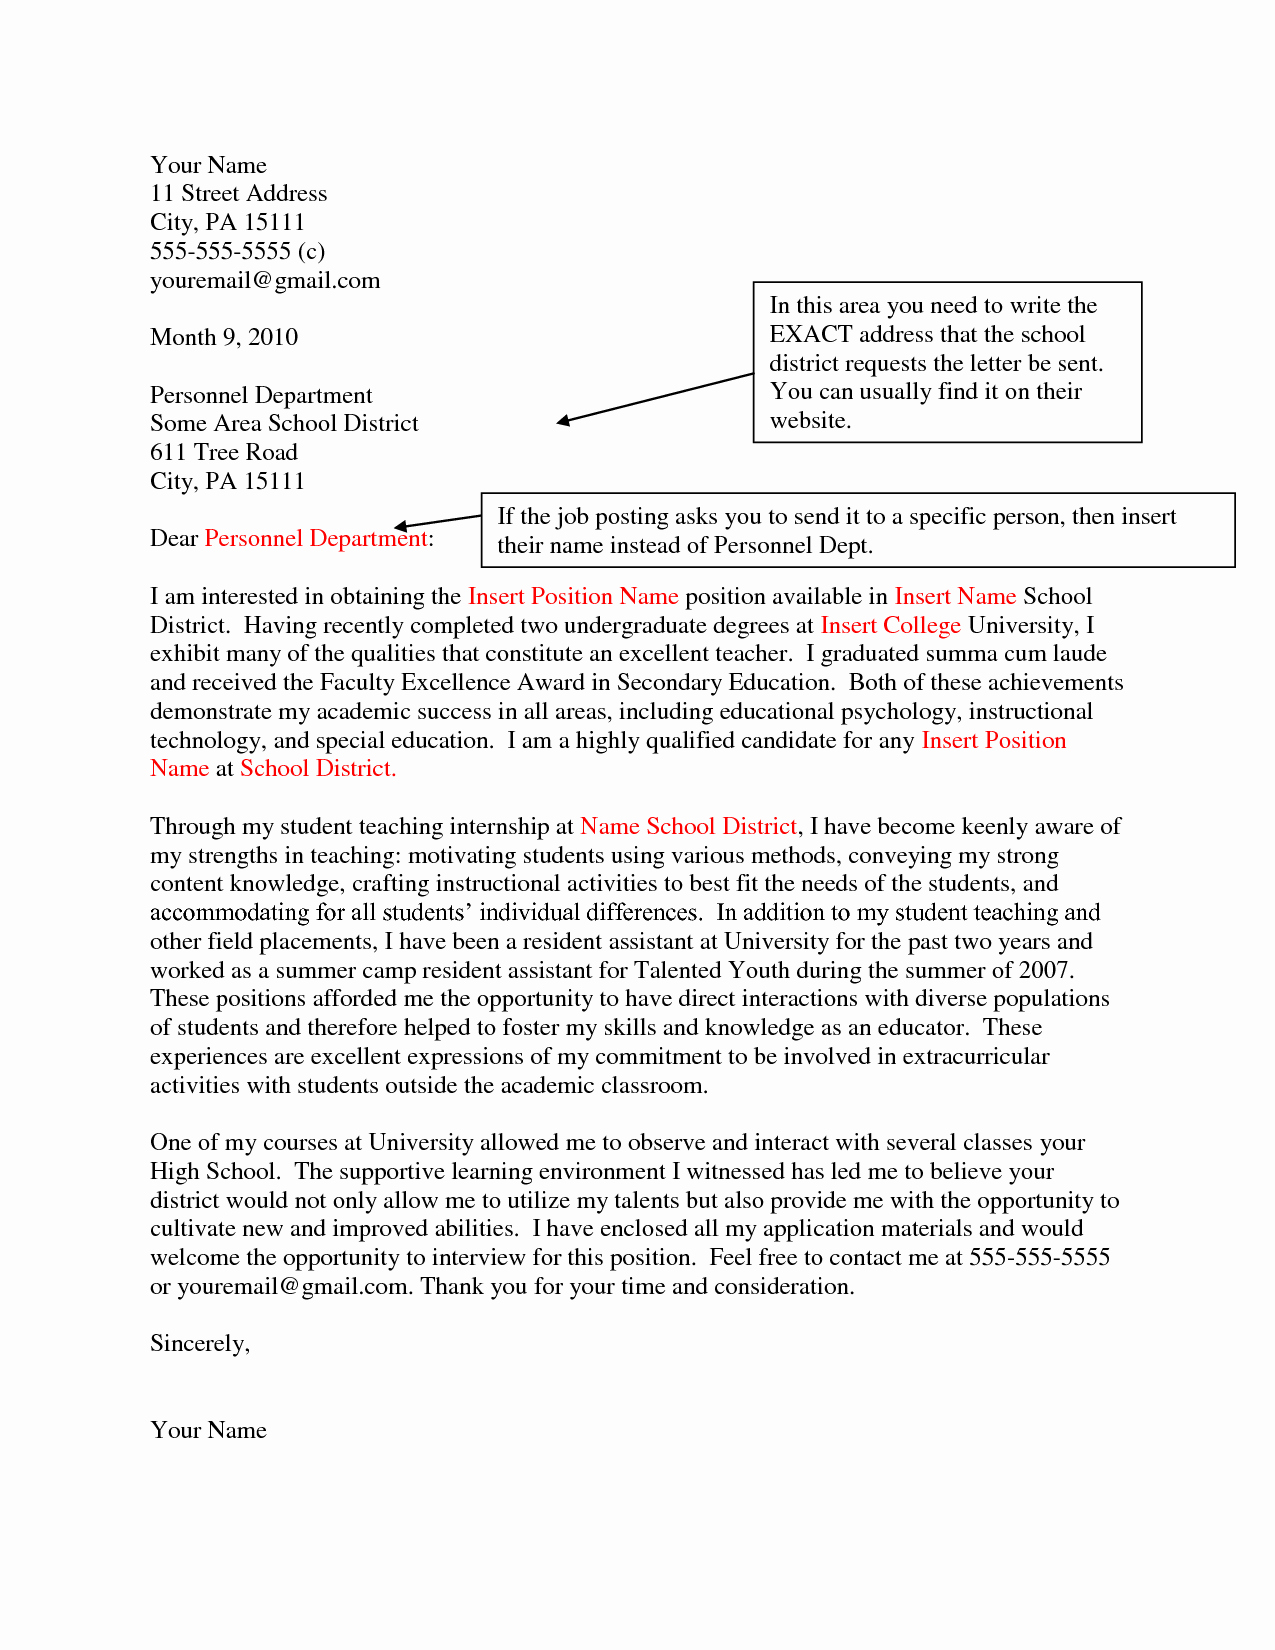 Letter Of Interest Templates Lovely How to Write A Cover Letter Of Interest Example for A Job